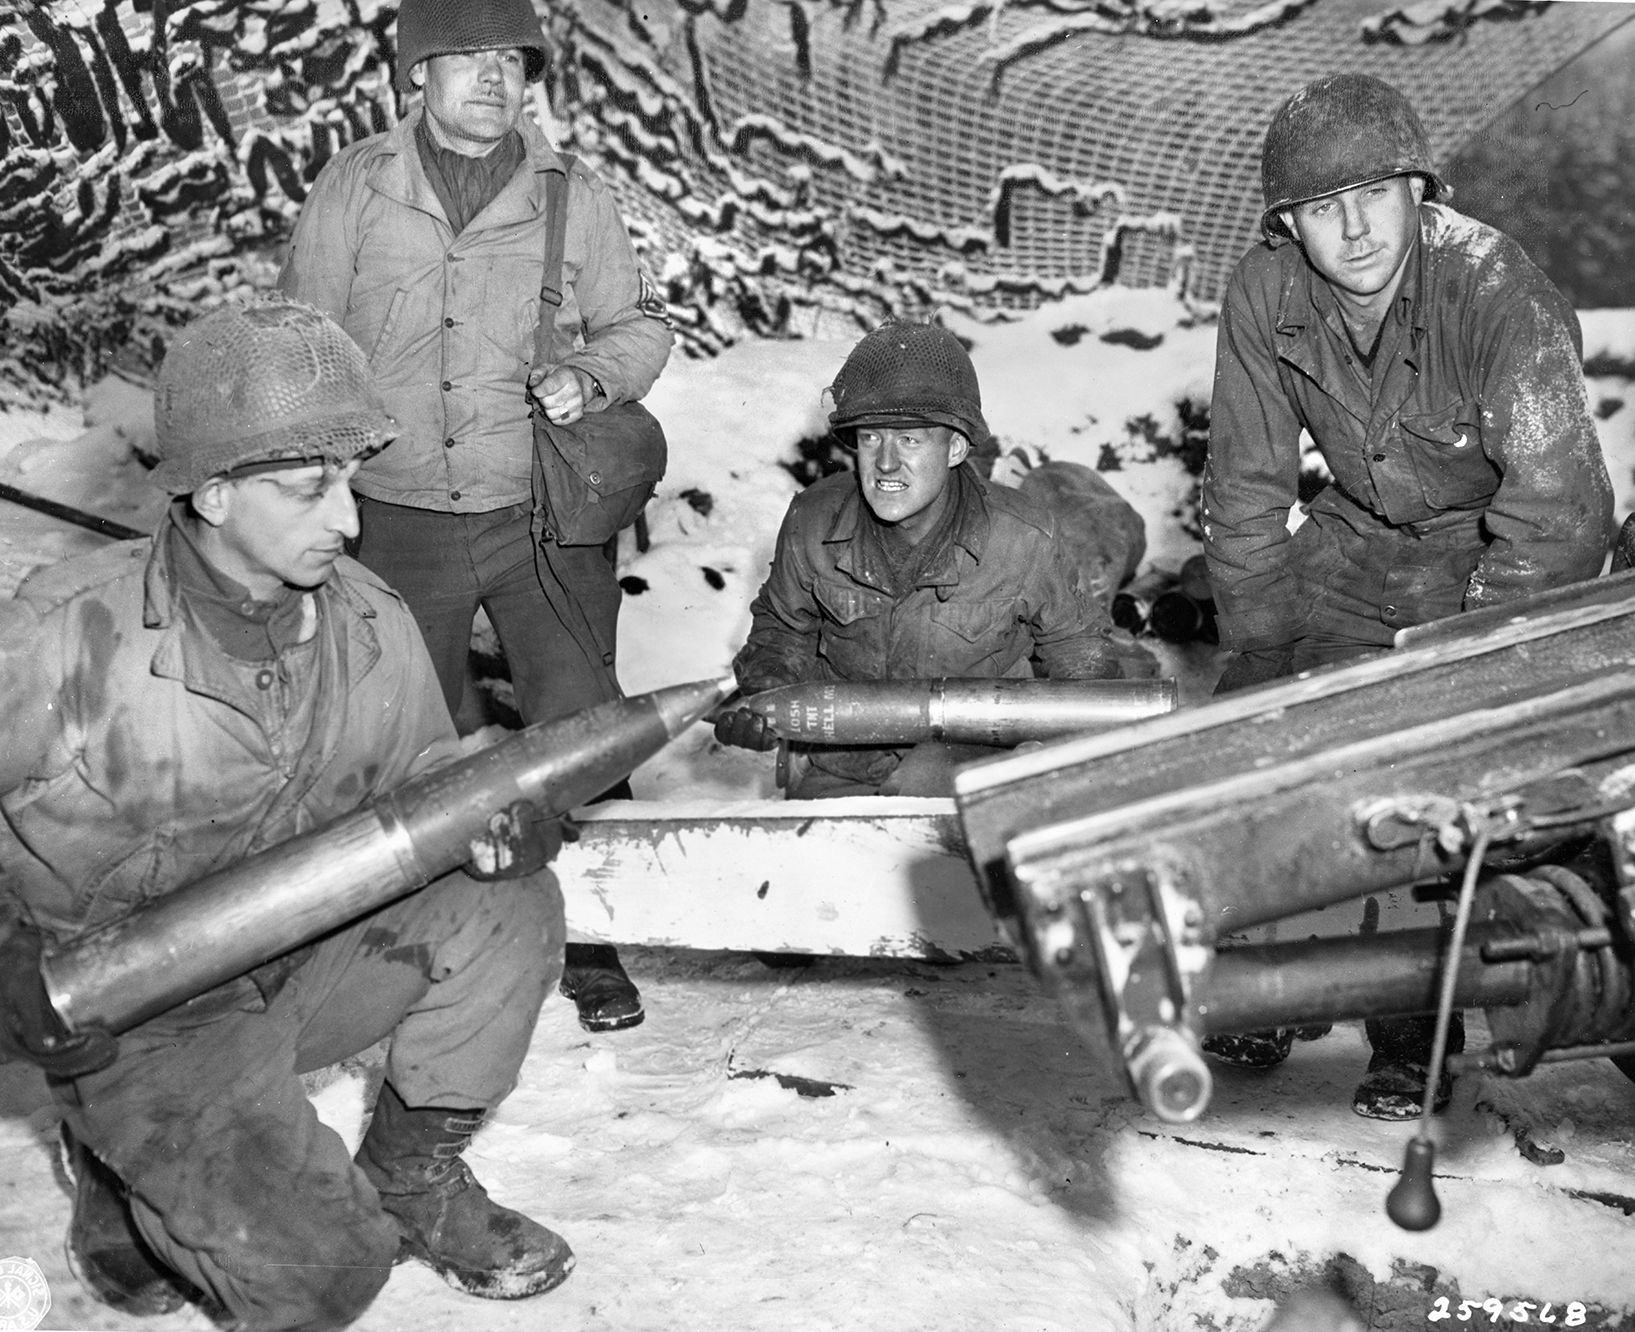 These American artillerymen of Battery A, 19th Field Artillery Regiment, 5th Infantry Division pose with 105mm shells at the ready. Their howitzers provided significant support for the Third Army drive to Bastogne, and American artillery performed superbly throughout World War II. 